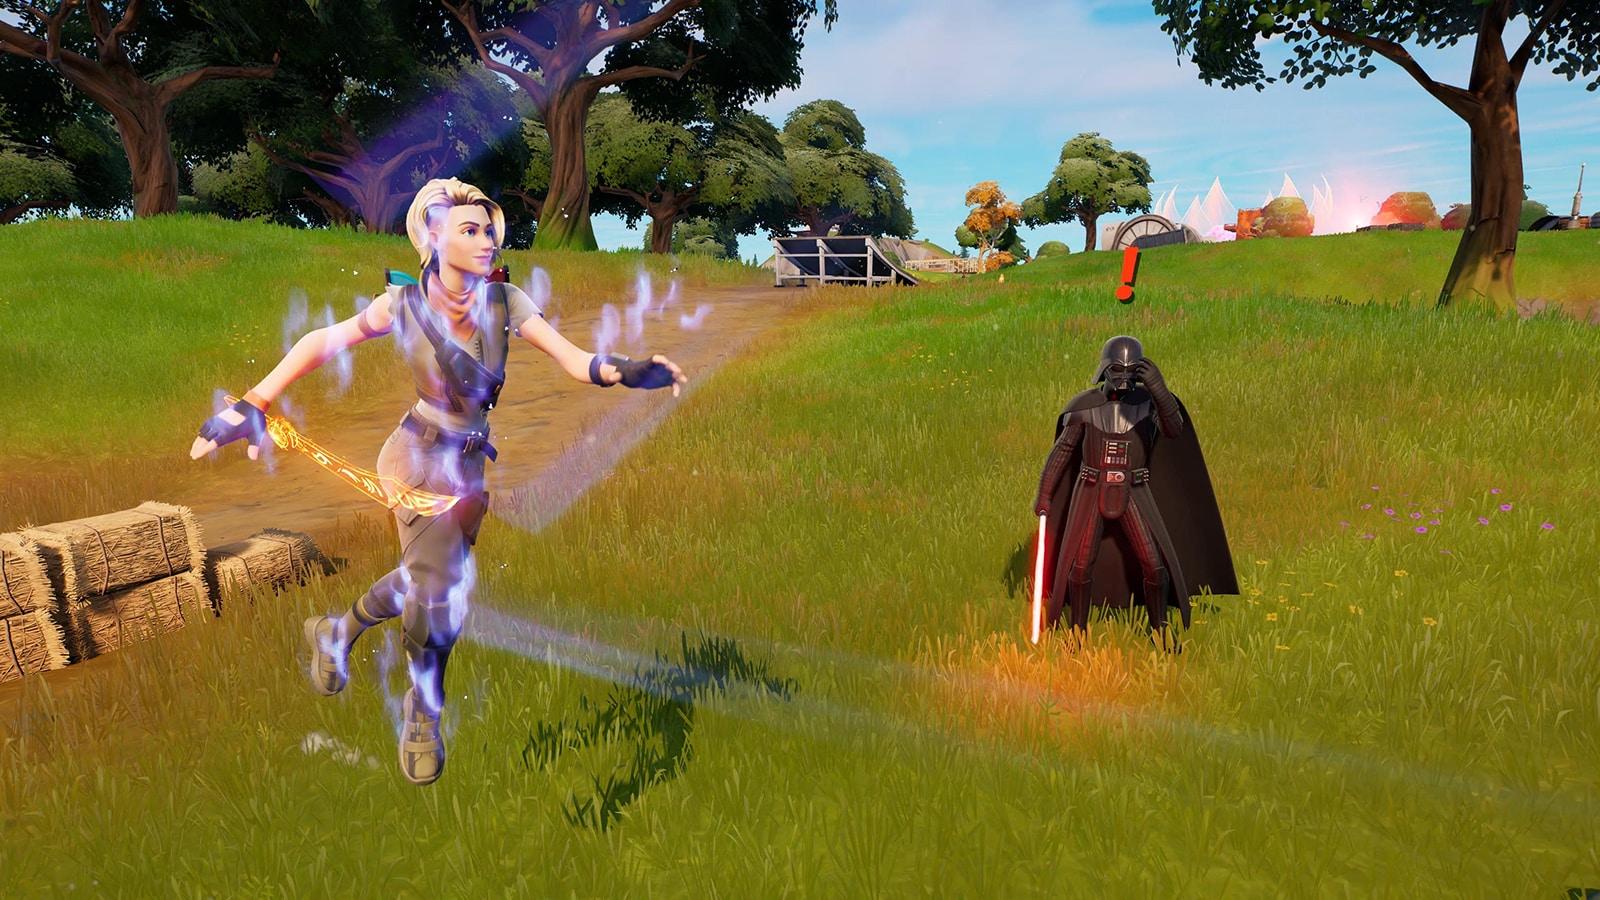 Darth Vader using the Force in Fortnite